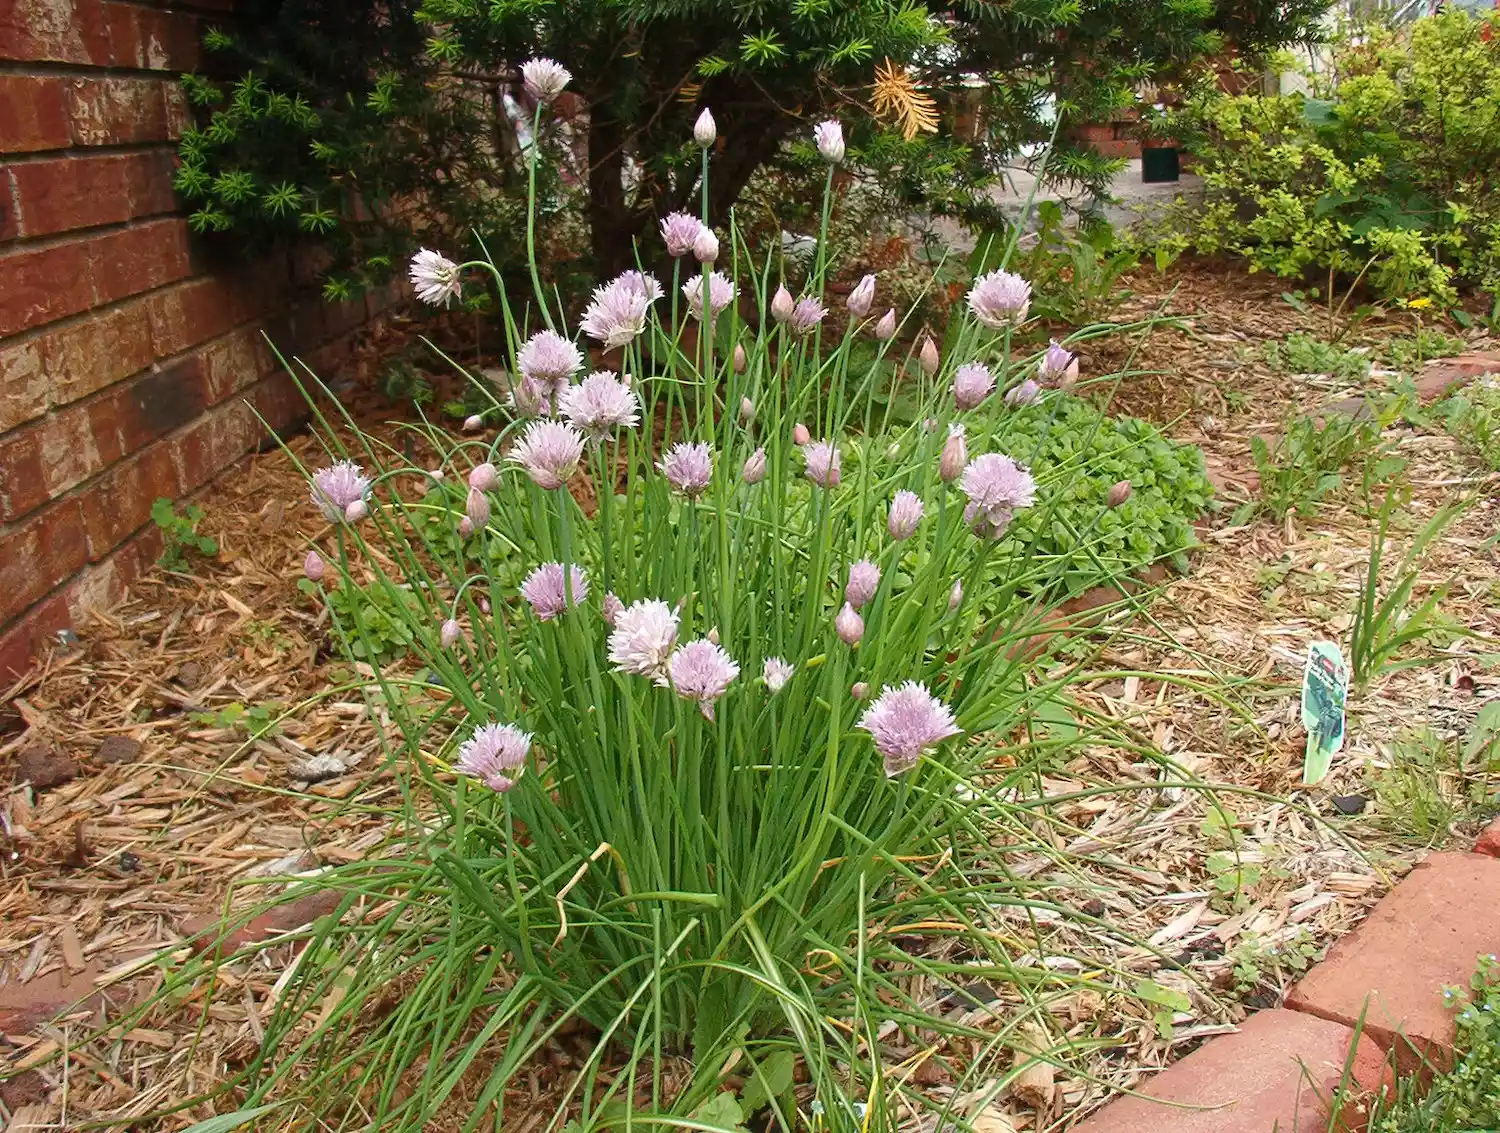 Chives growing in a backyard